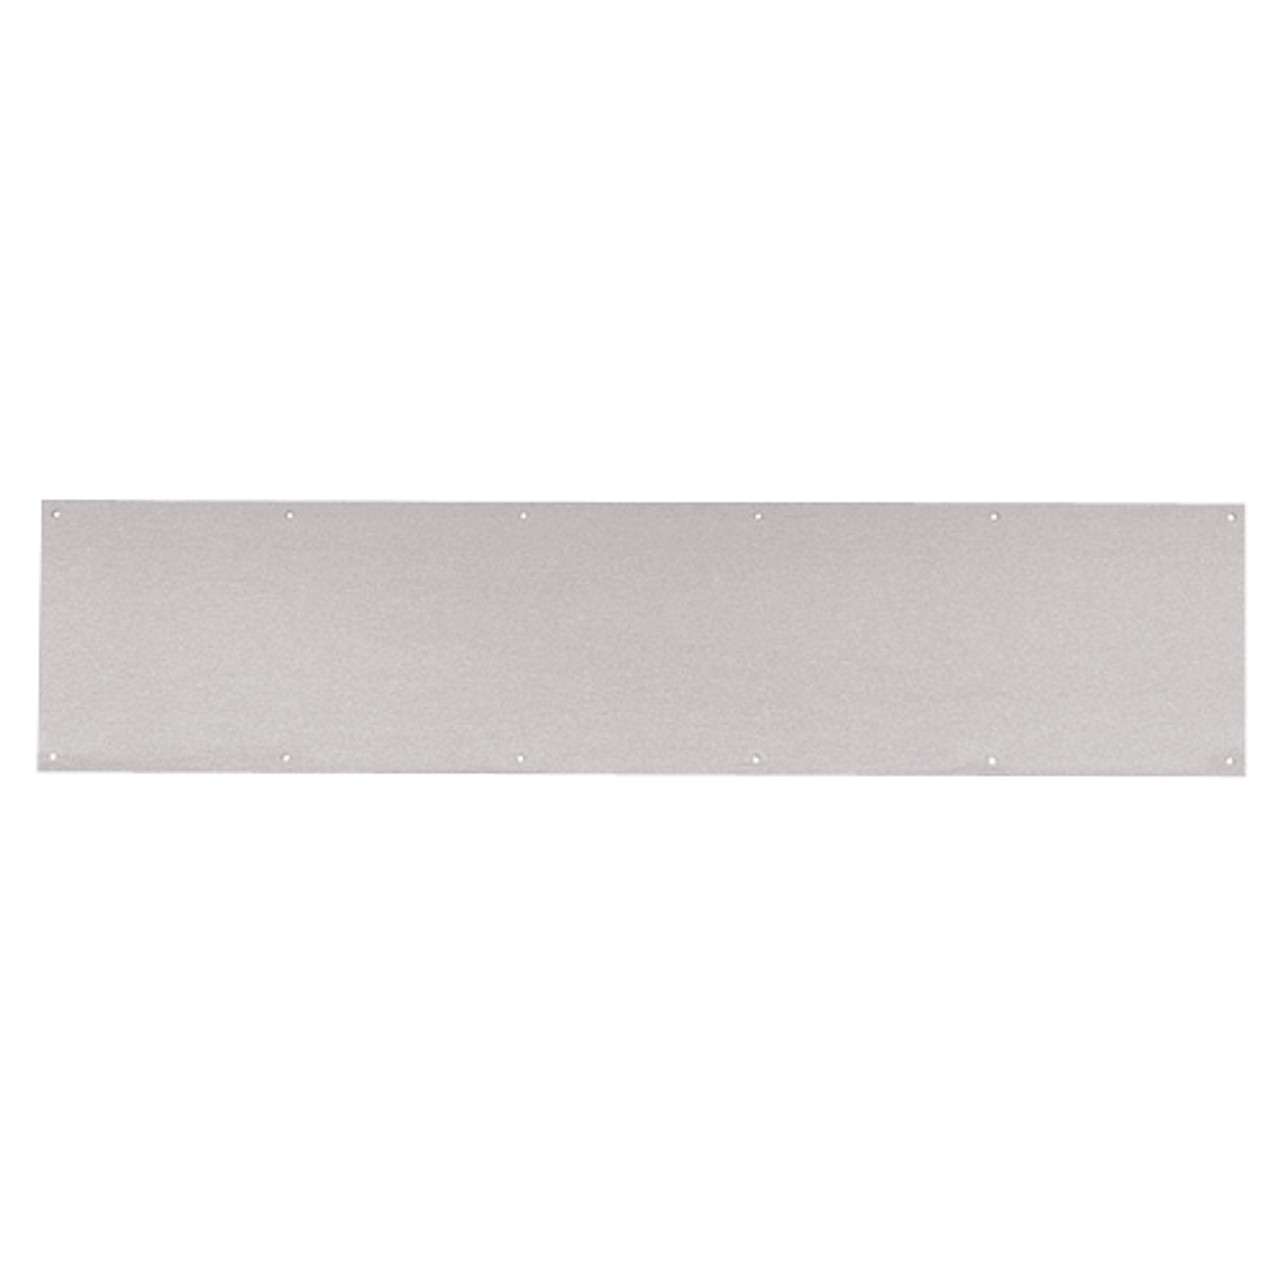 8400-US32D-36x30.5-B-CS Ives 8400 Series Protection Plate in Satin Stainless Steel